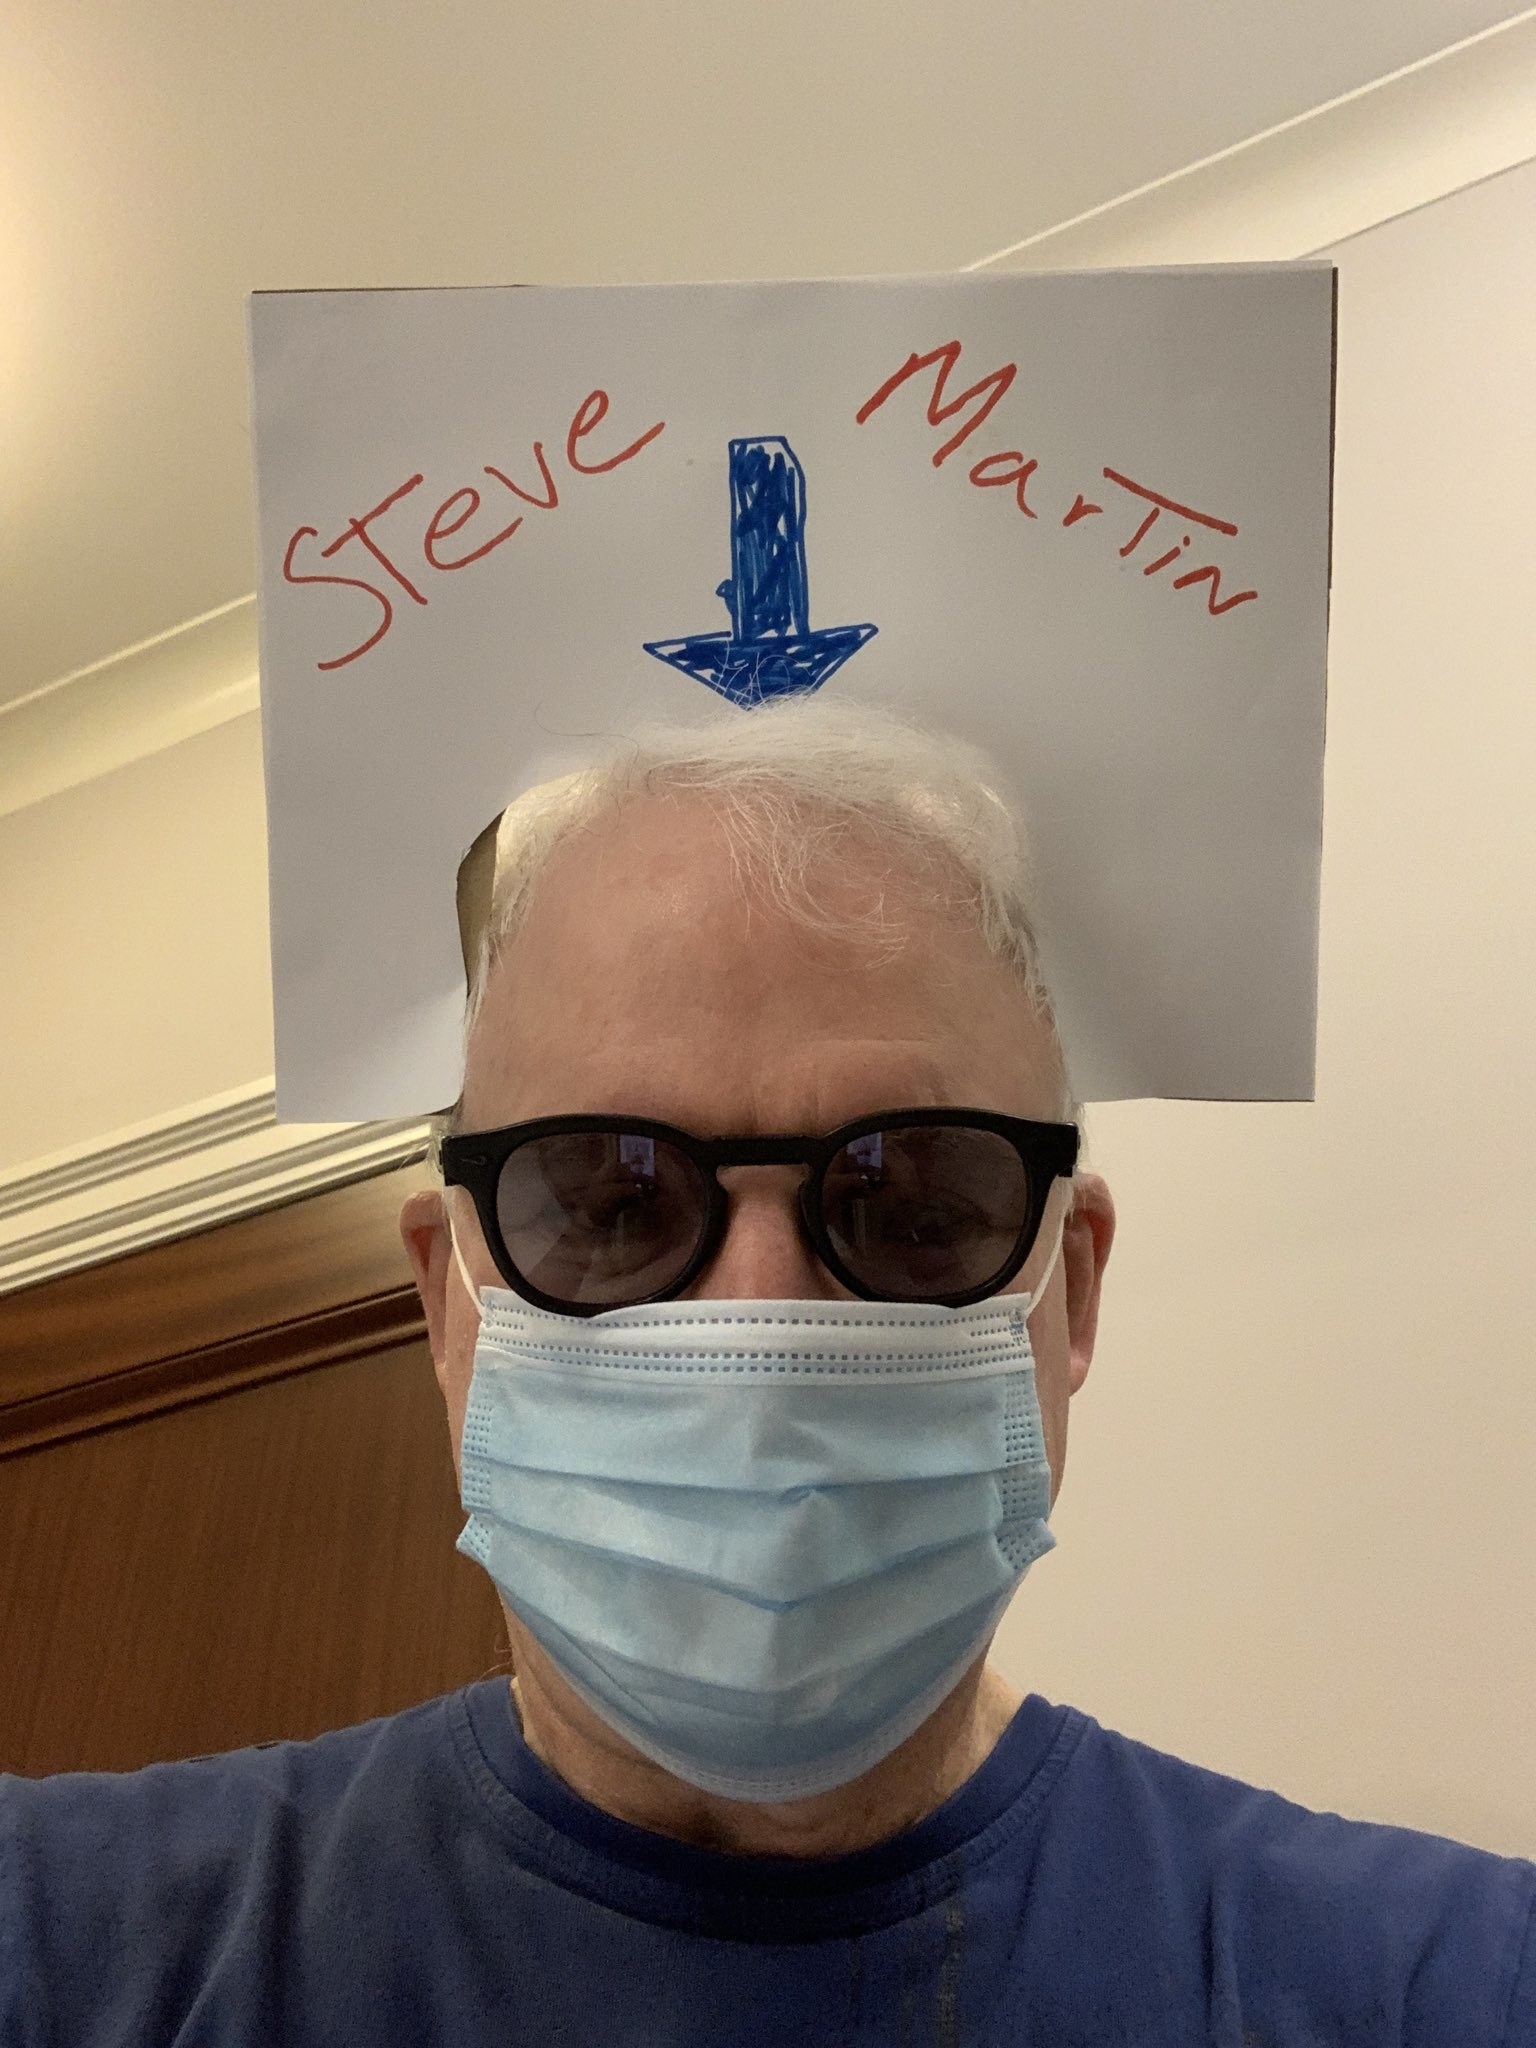 Steve wearing a cardboard sign around his head that says &quot;Steve Martin&quot; with an arrow pointing to his face